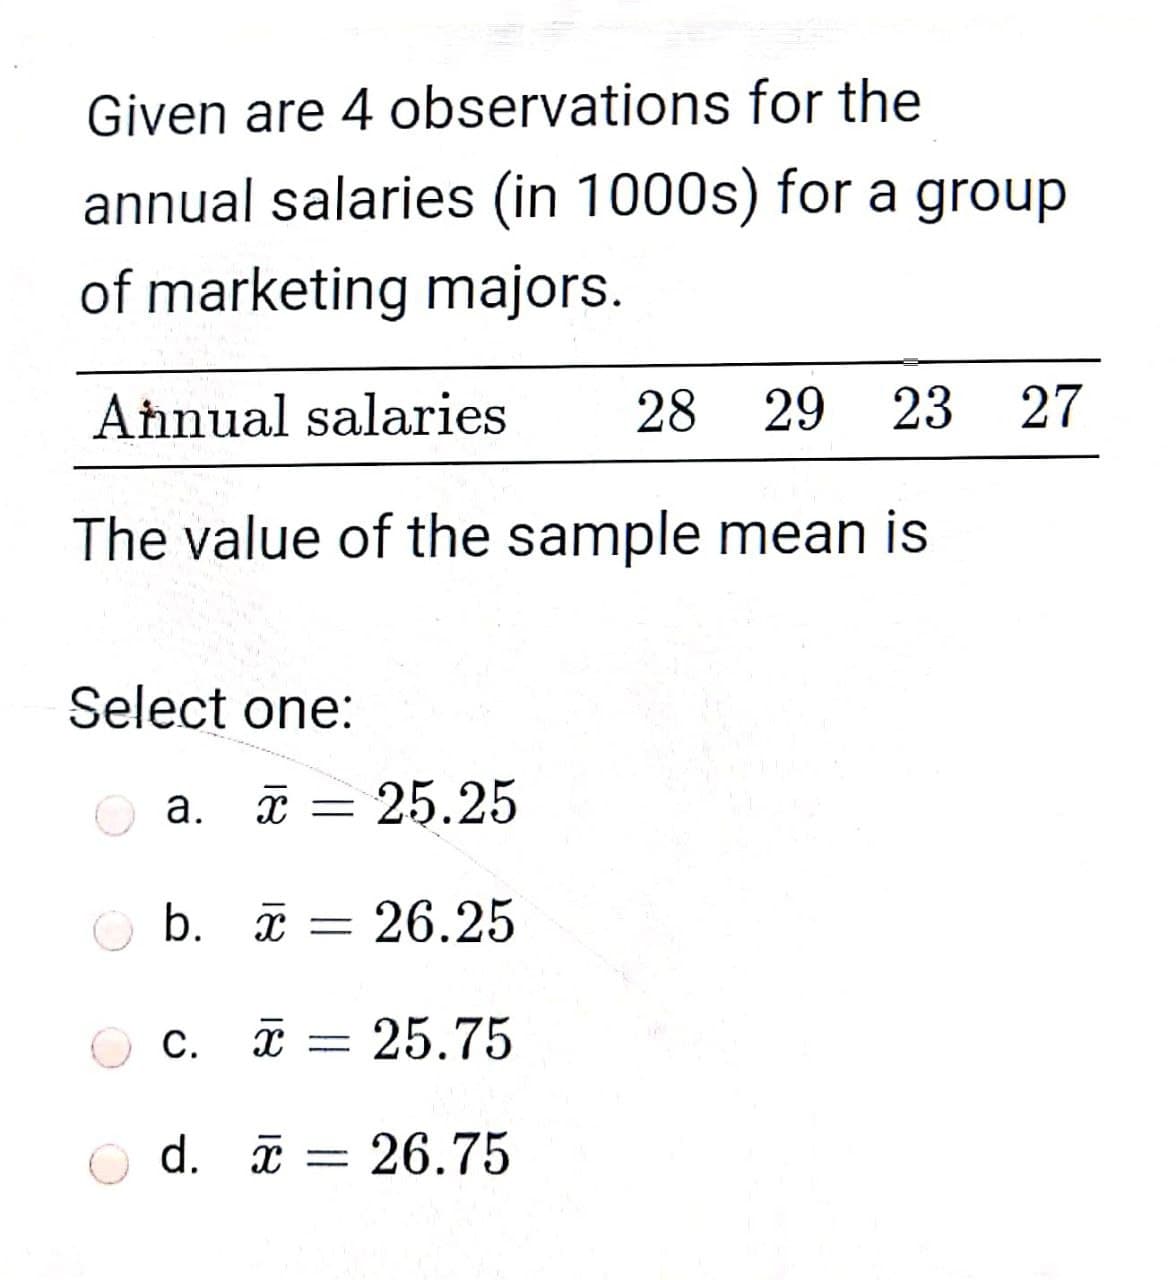 Given are 4 observations for the
annual salaries (in 1000s) for a group
of marketing majors.
Aħnual salaries
28
29 23
27
The value of the sample mean is
Select one:
а.
x =
25.25
b. ī = 26.25
c. i = 25.75
С.
d. I
= 26.75
